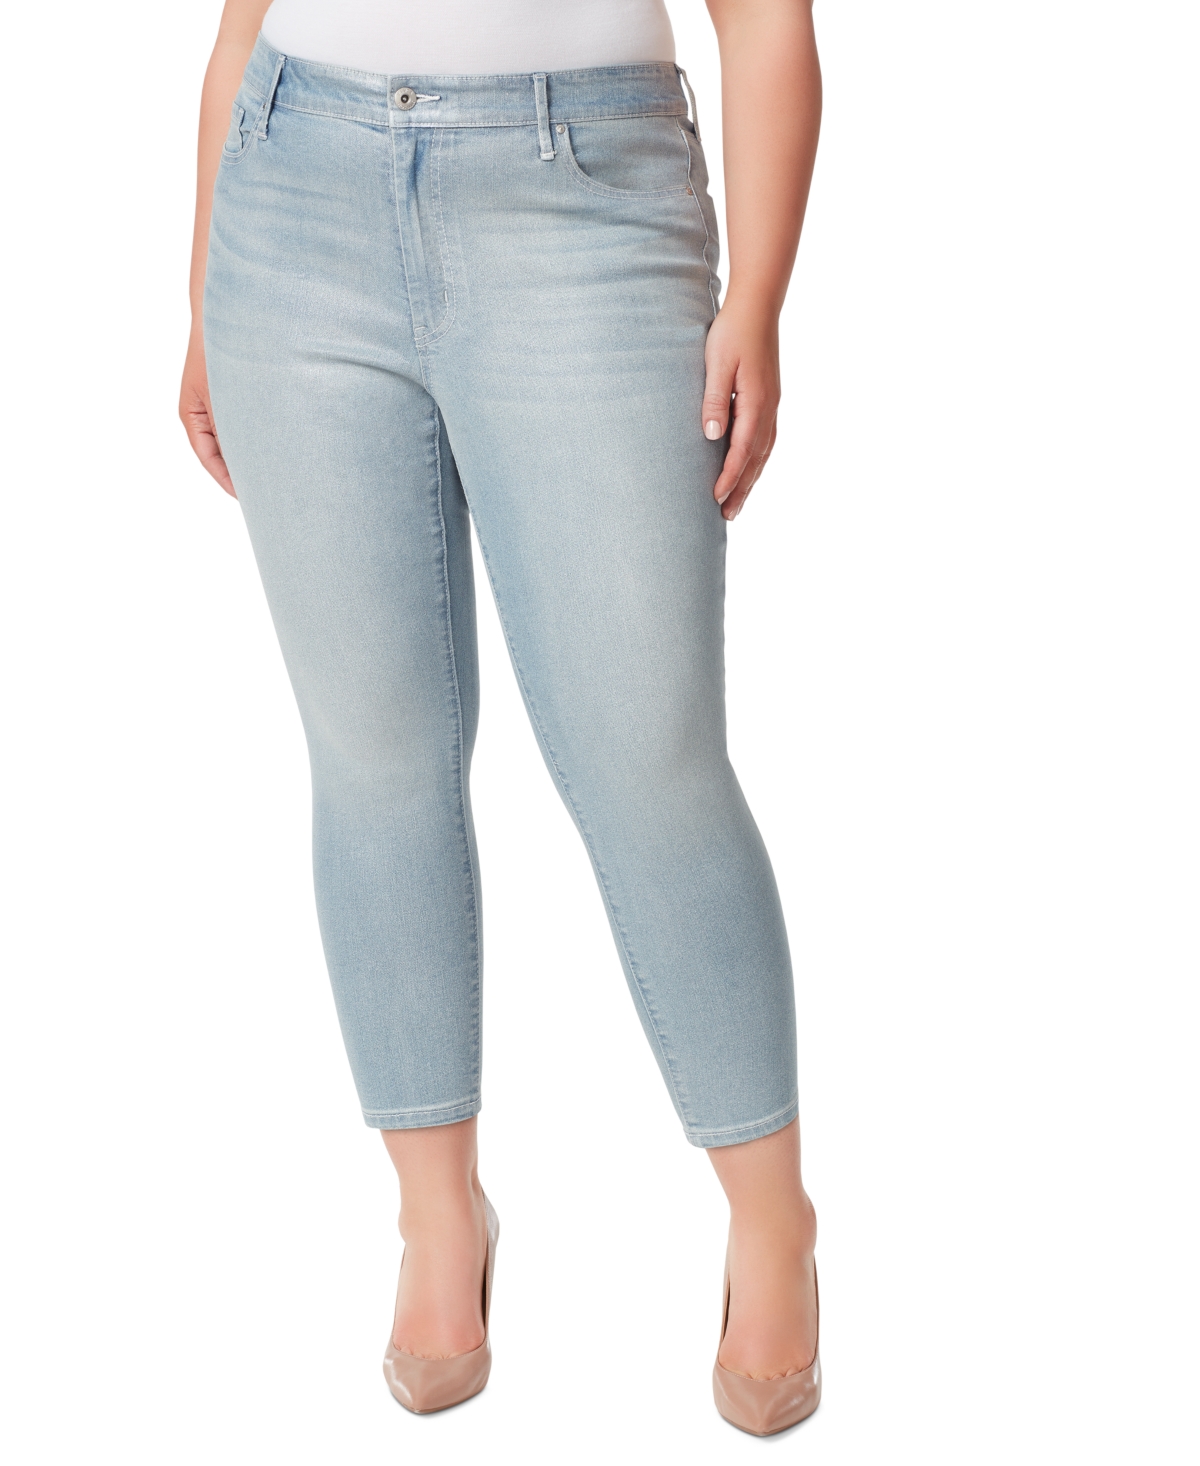 JESSICA SIMPSON TRENDY PLUS SIZE ADORED HIGH-RISE SKINNY ANKLE JEANS